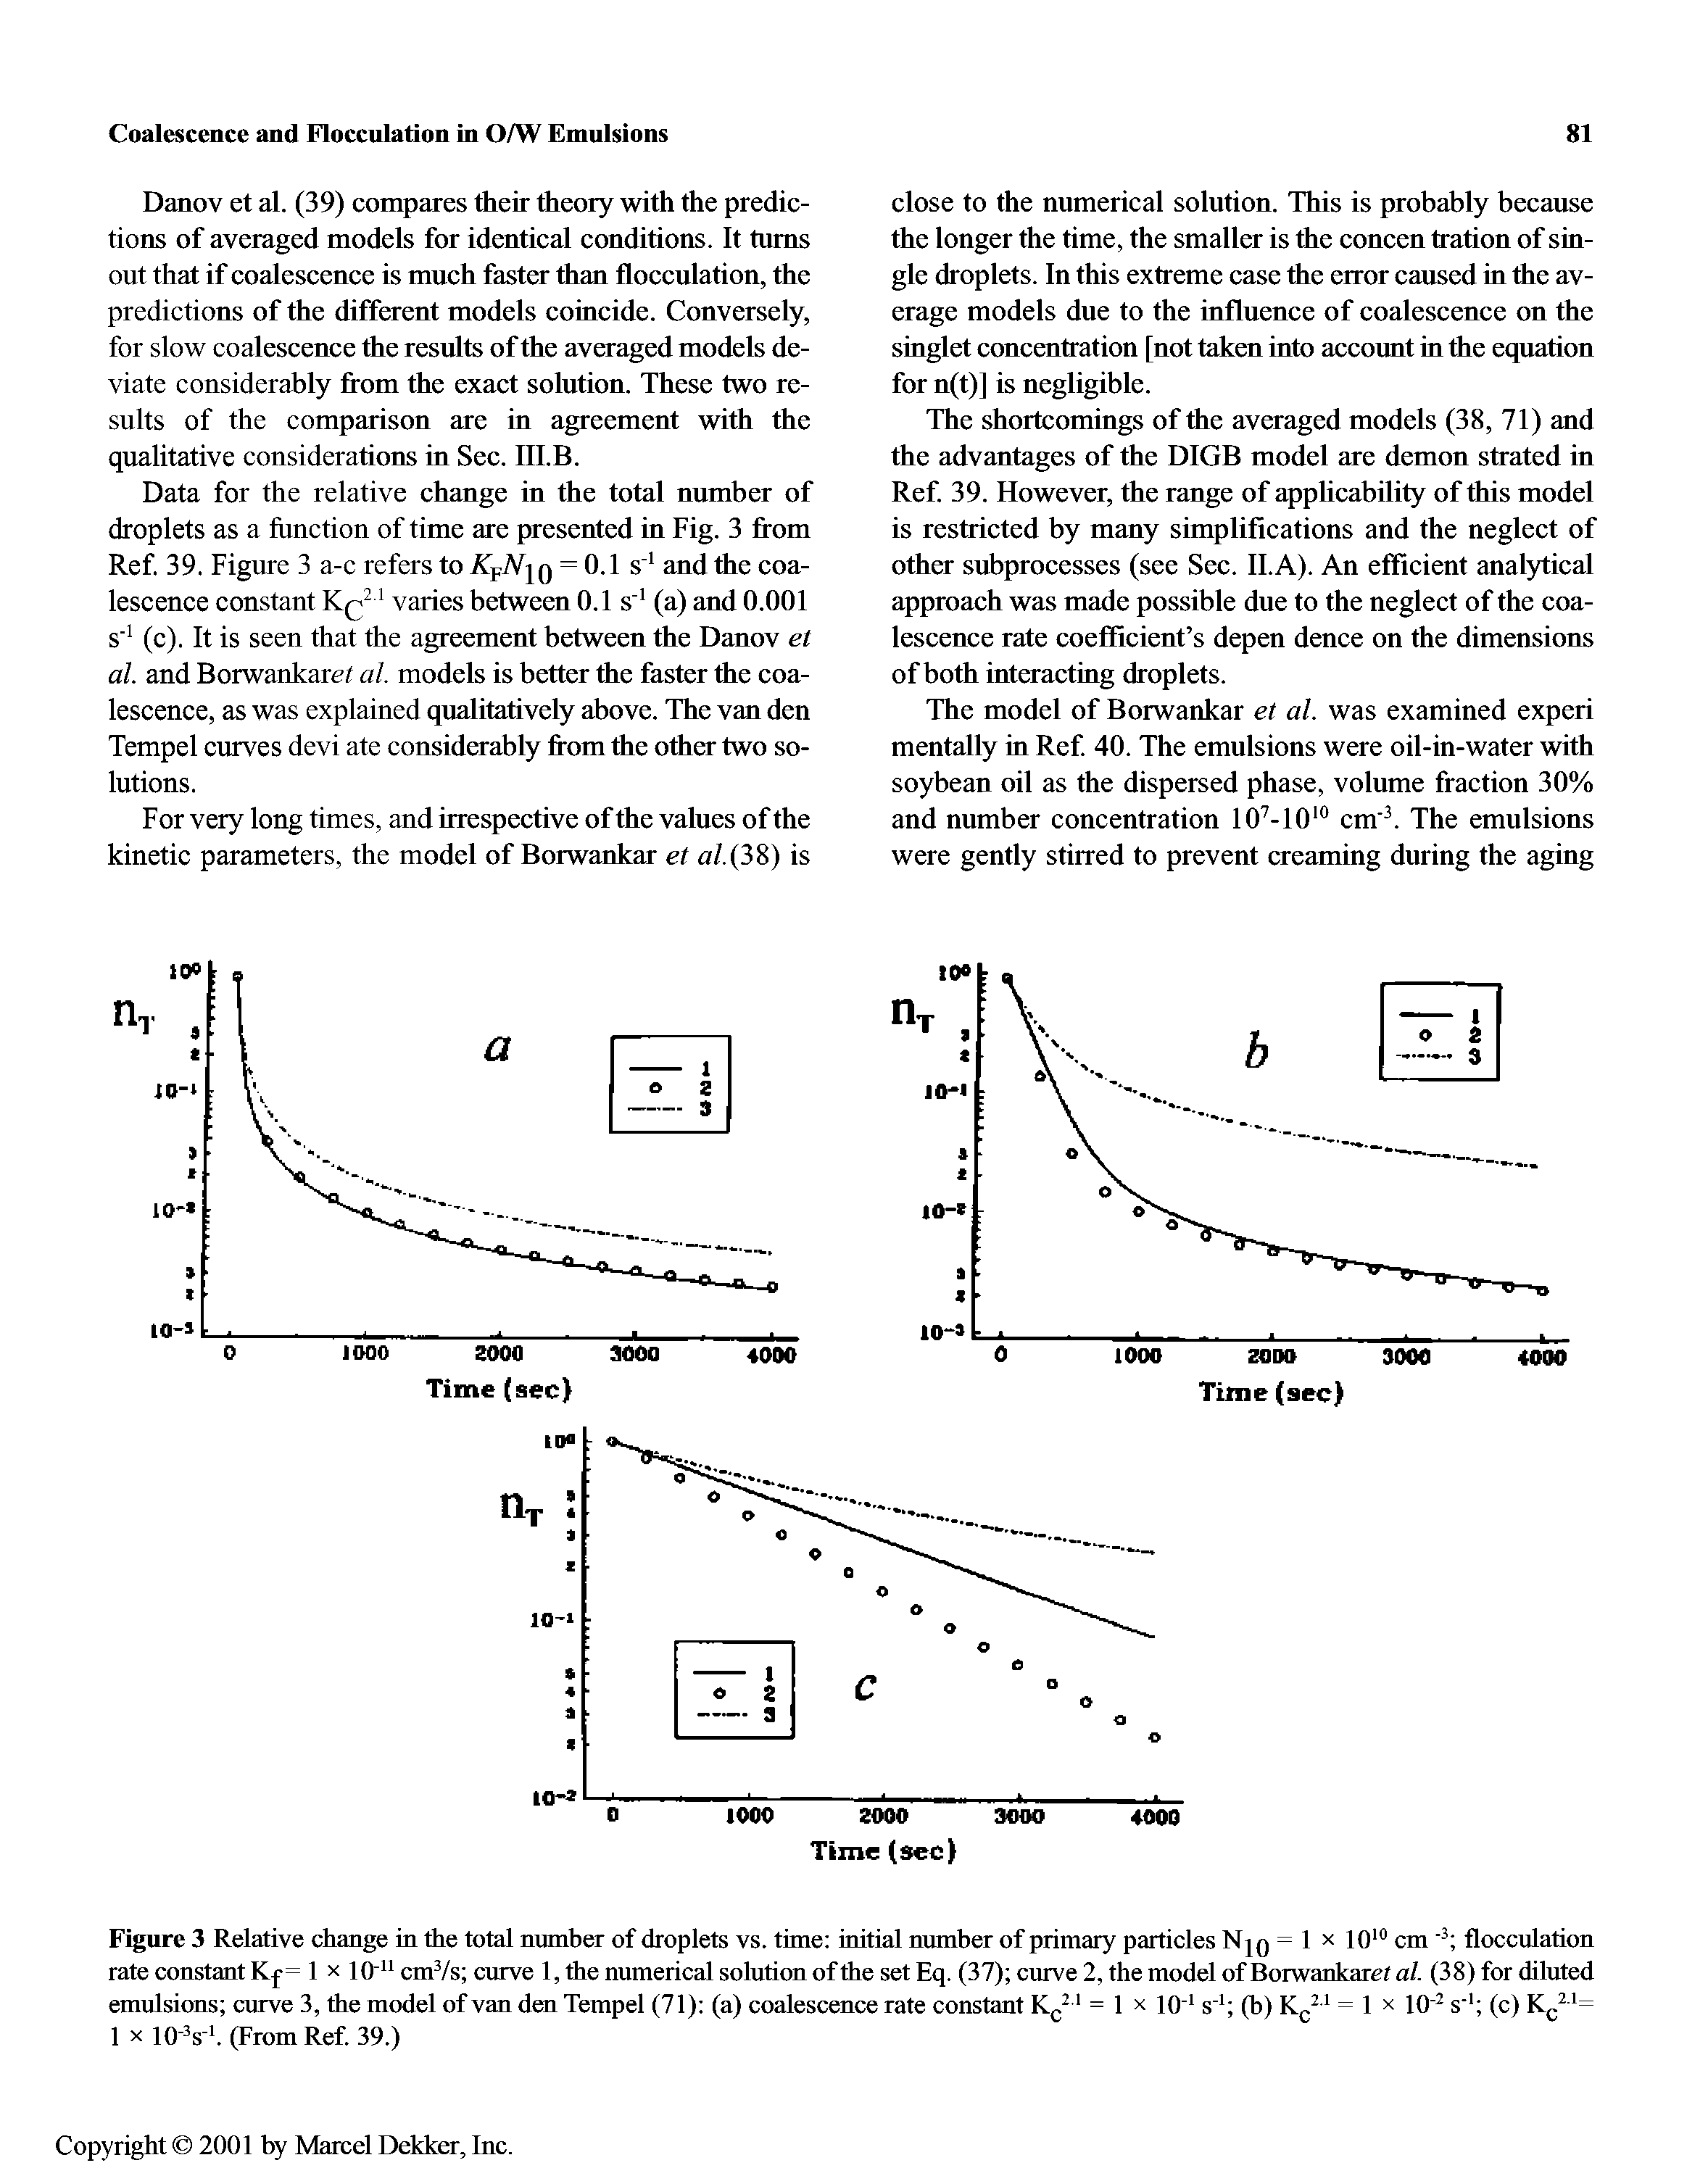 Figure 3 Relative change in the total number of droplets vs. time initial number of primary particles Njq = 1 x 10 cm flocculation rate constant Kp= 1 x 10 cmVs curve 1, the numerical solution ofthe set Eq. (37) curve 2, the model of Borwankaref al. (38) for diluted emulsions curve 3, the model of van den Tempel (71) (a) coalescence rate constant = 1 x iQ- s" (b) = 1 x iQ - s" (c) Kg =...